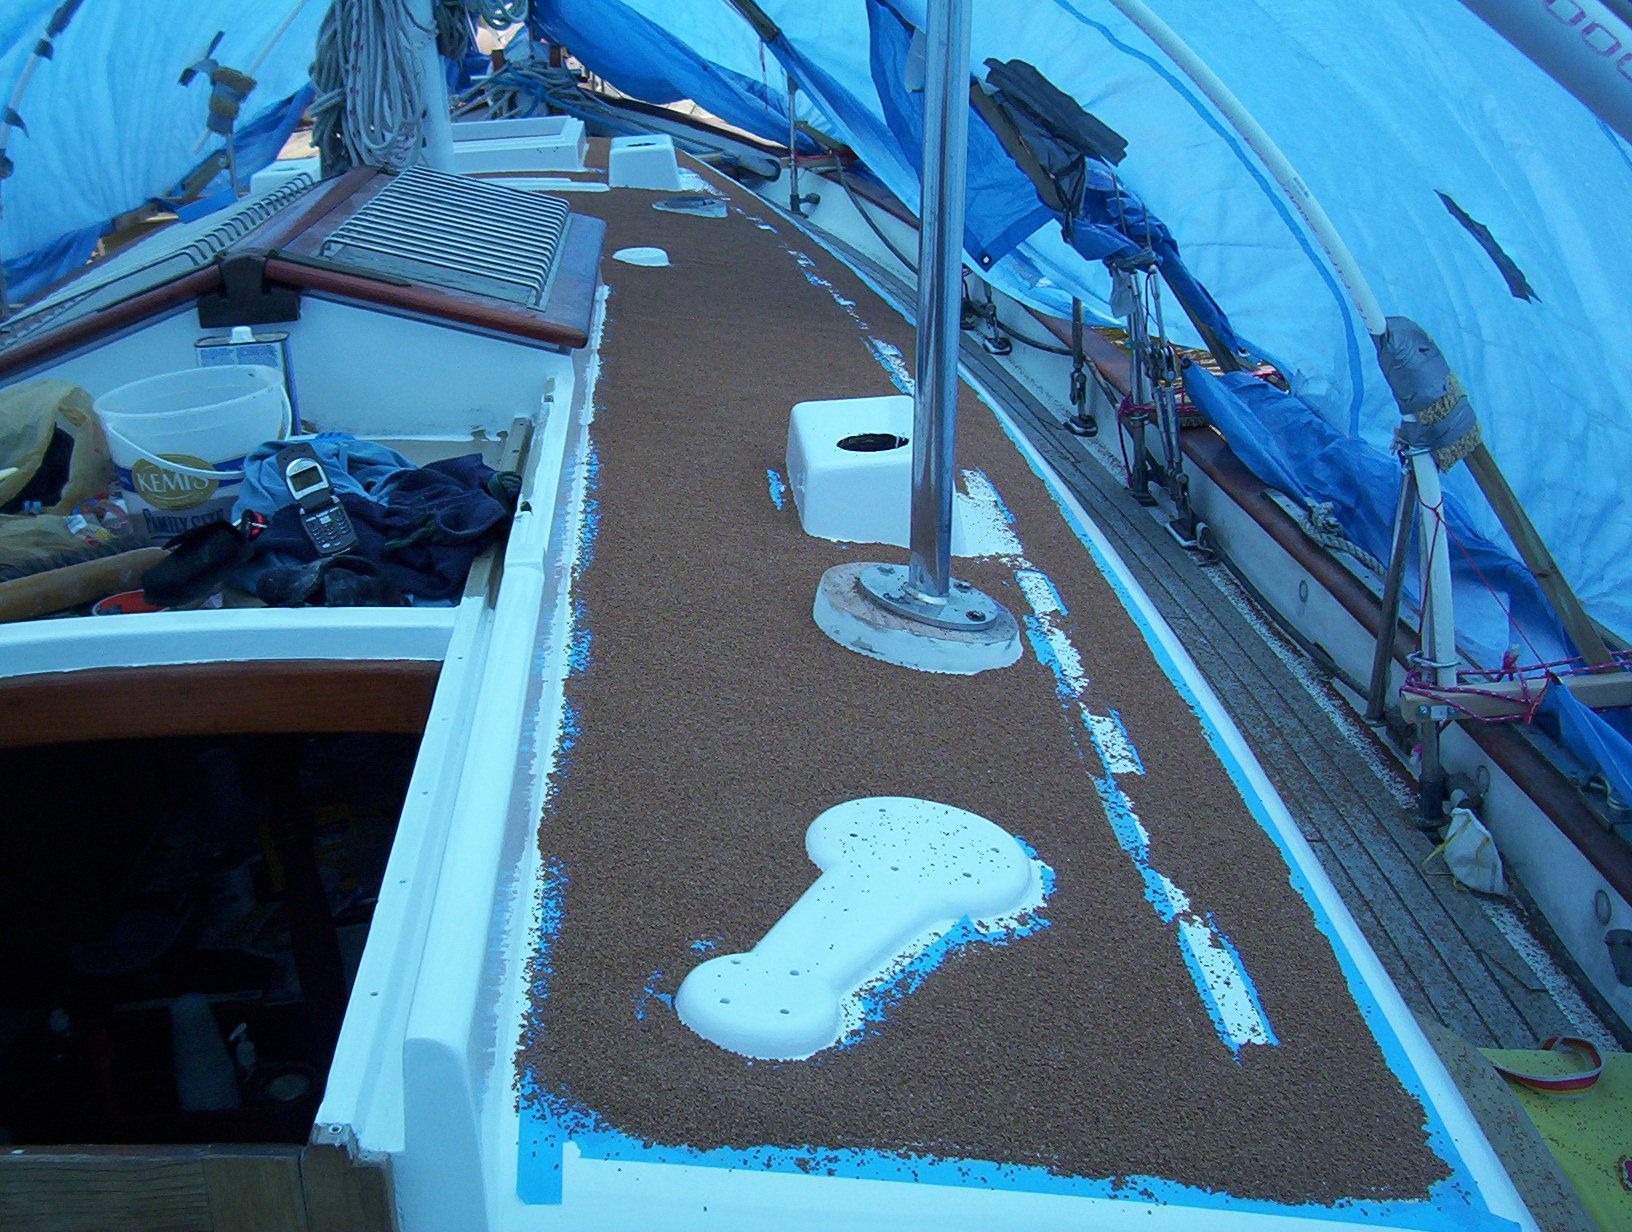 Crushed walnut shells being applied to wet deck paint